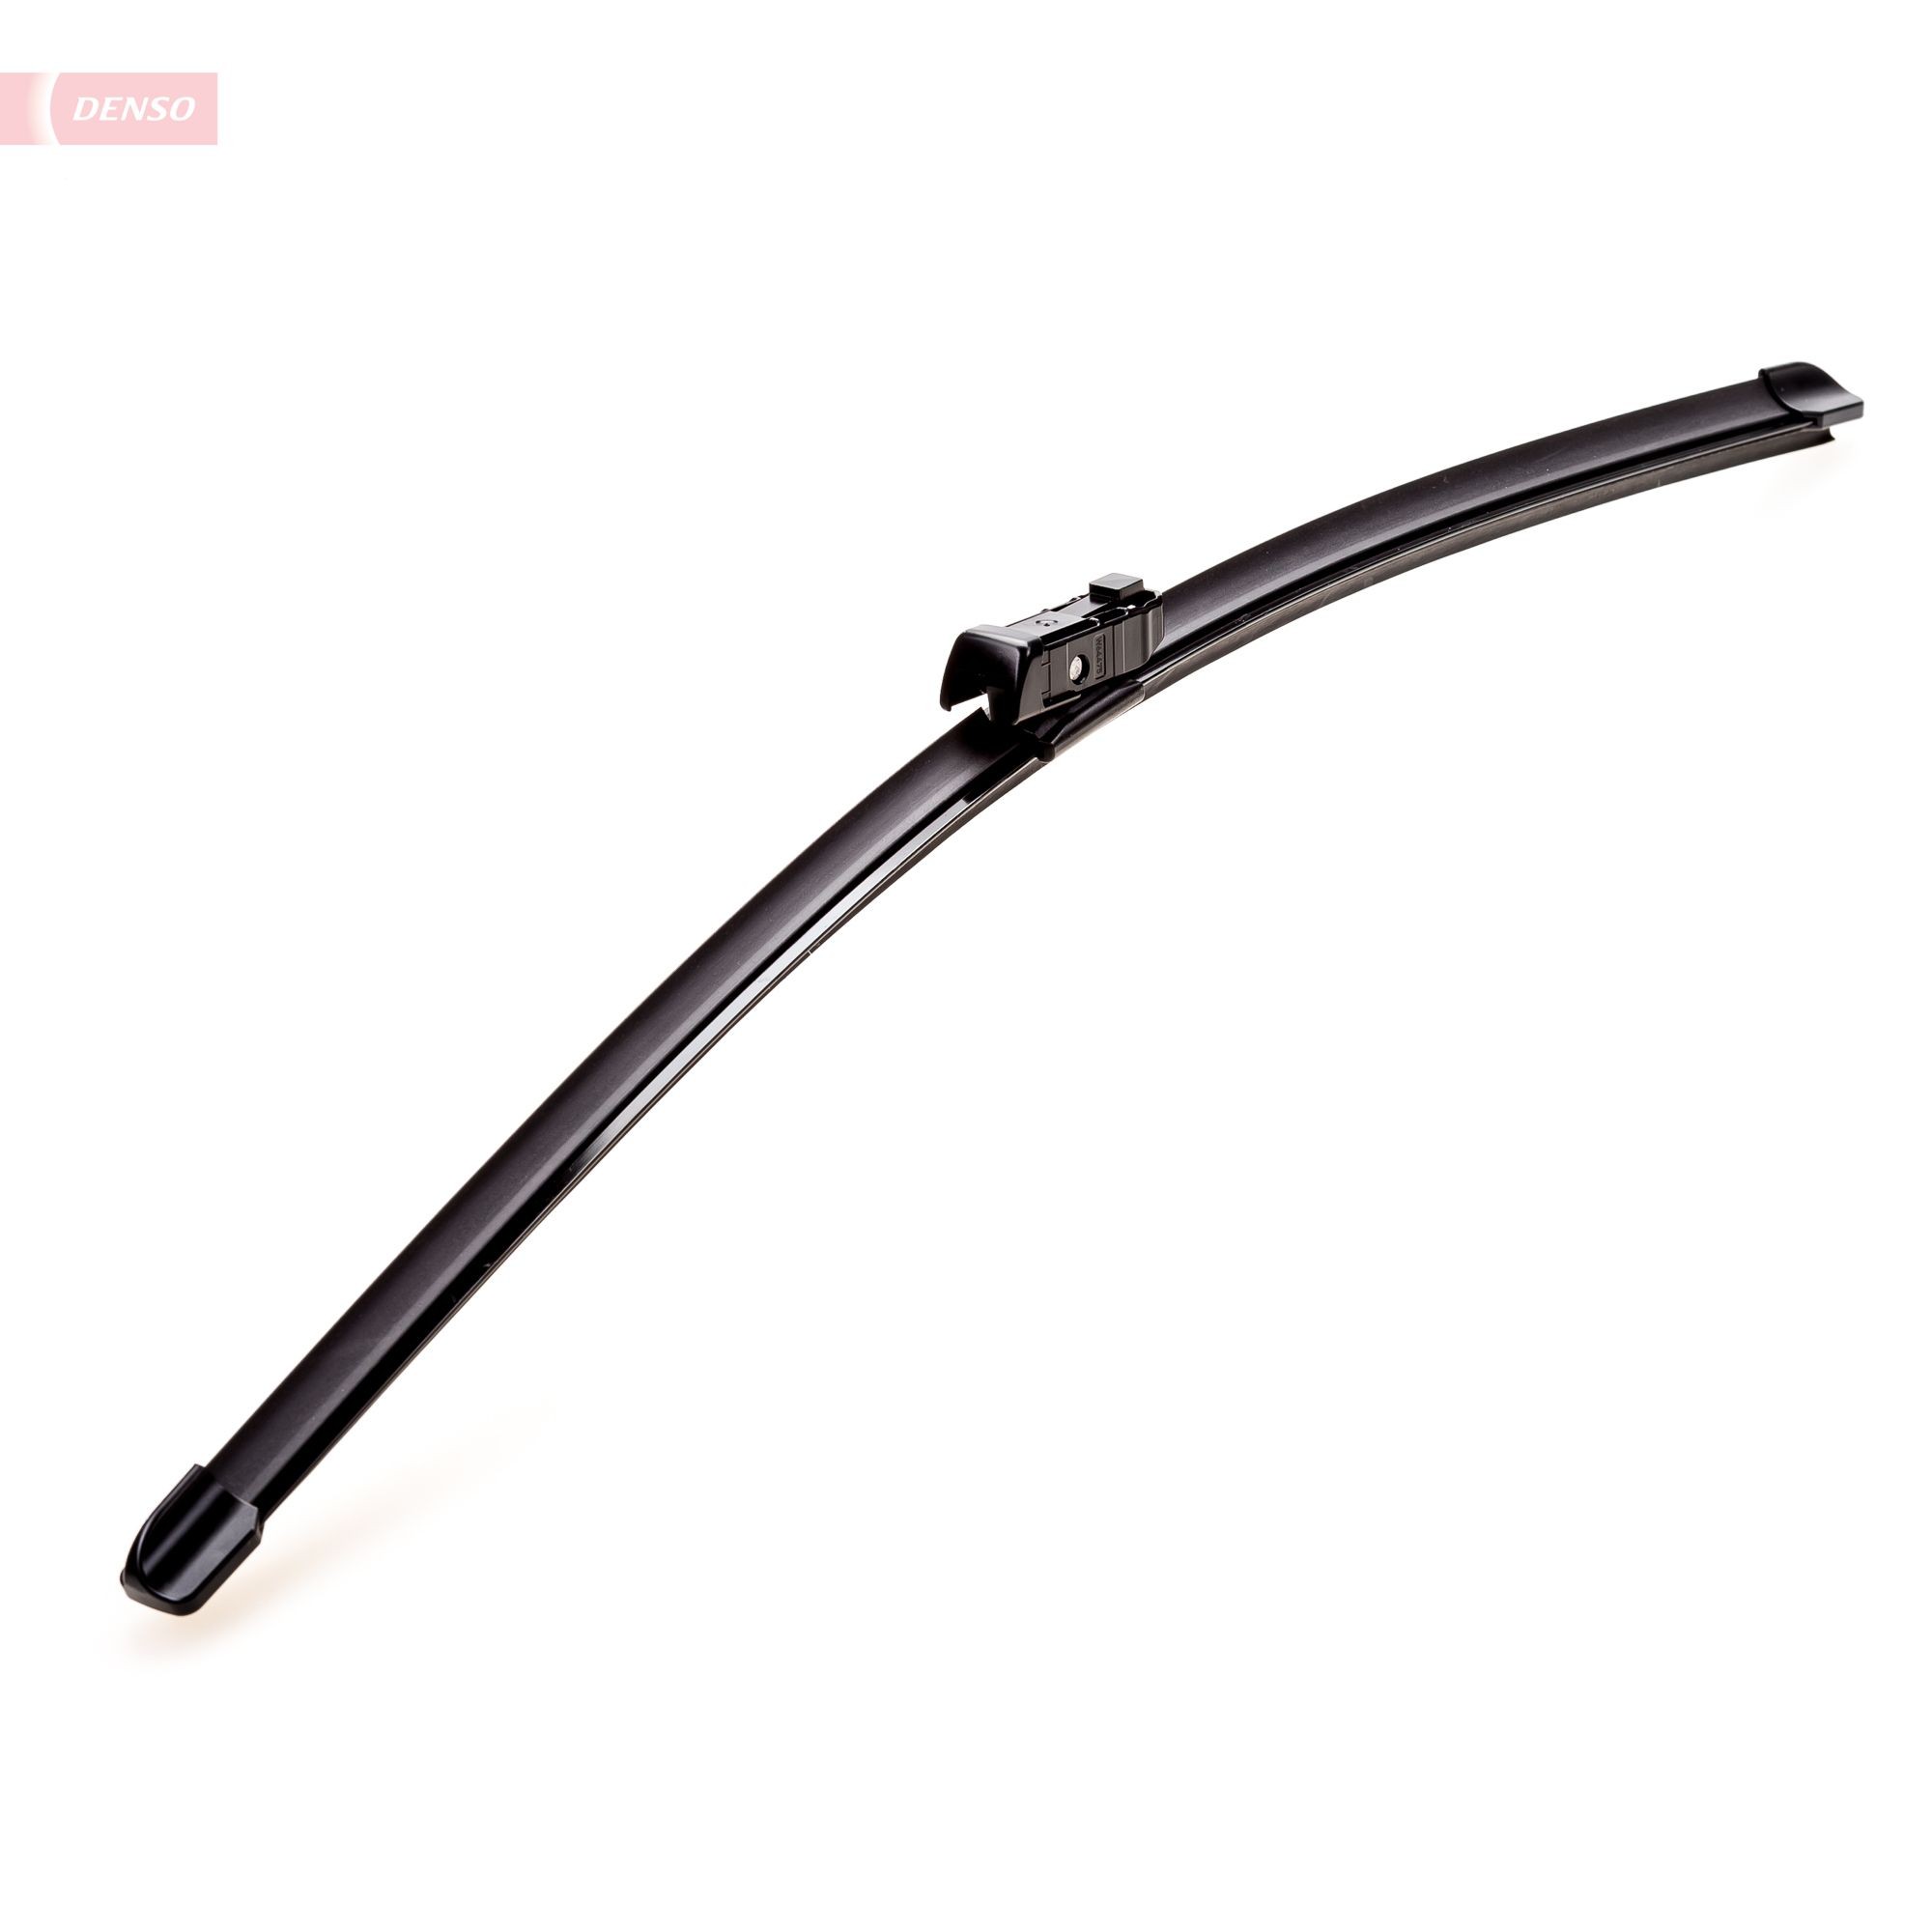 DENSO Windshield wipers DF-049 for AUDI A7, A6